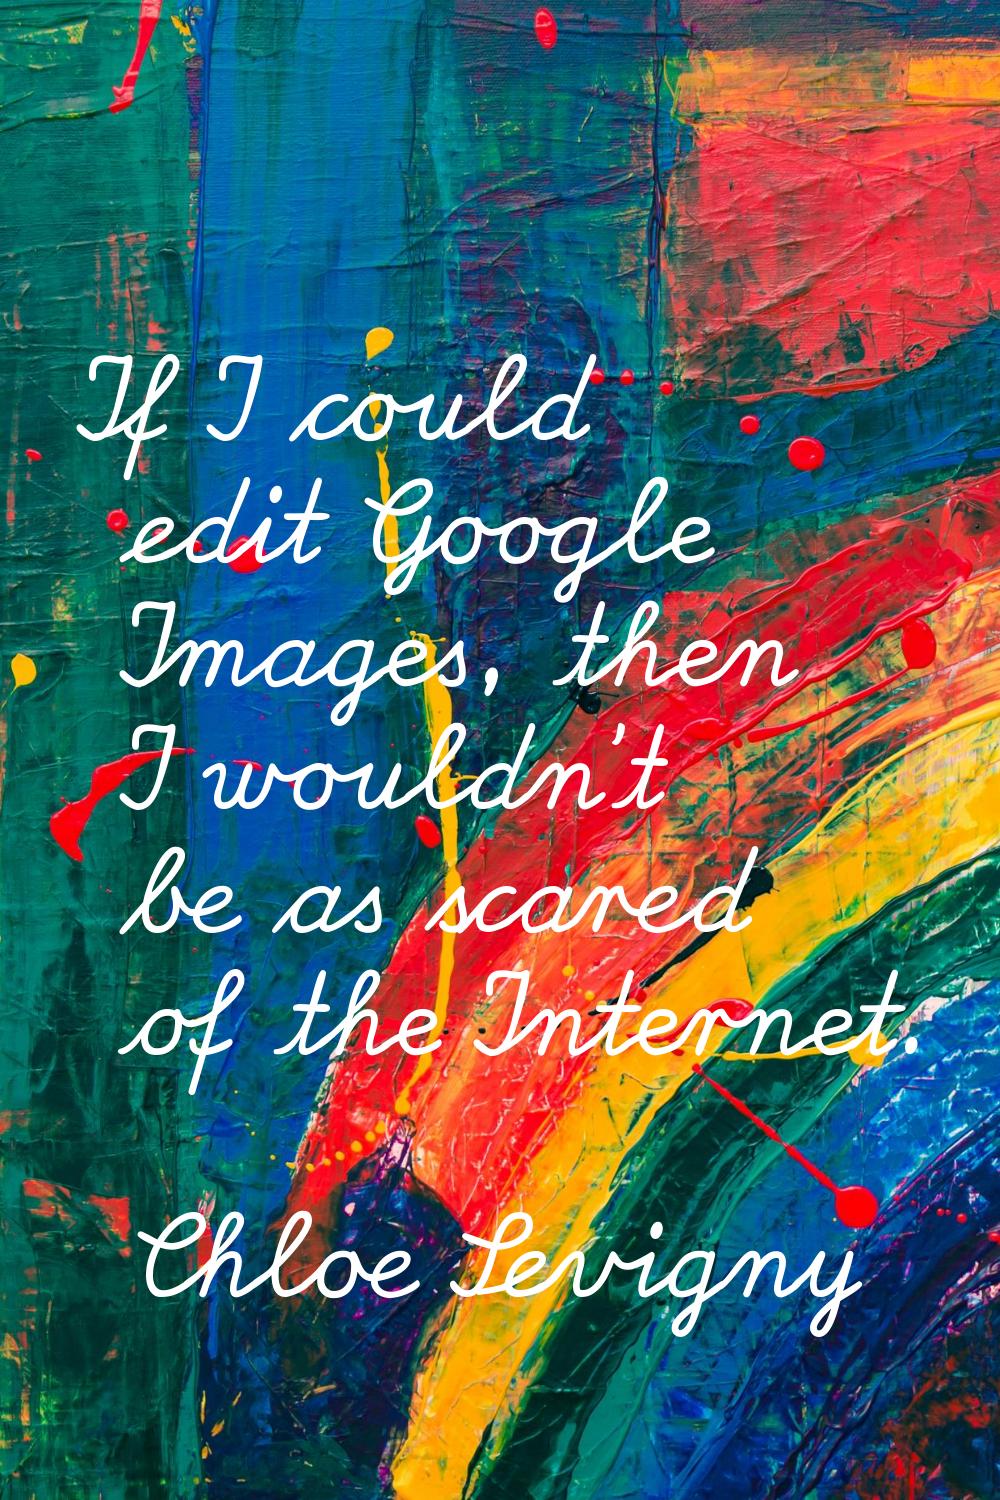 If I could edit Google Images, then I wouldn't be as scared of the Internet.